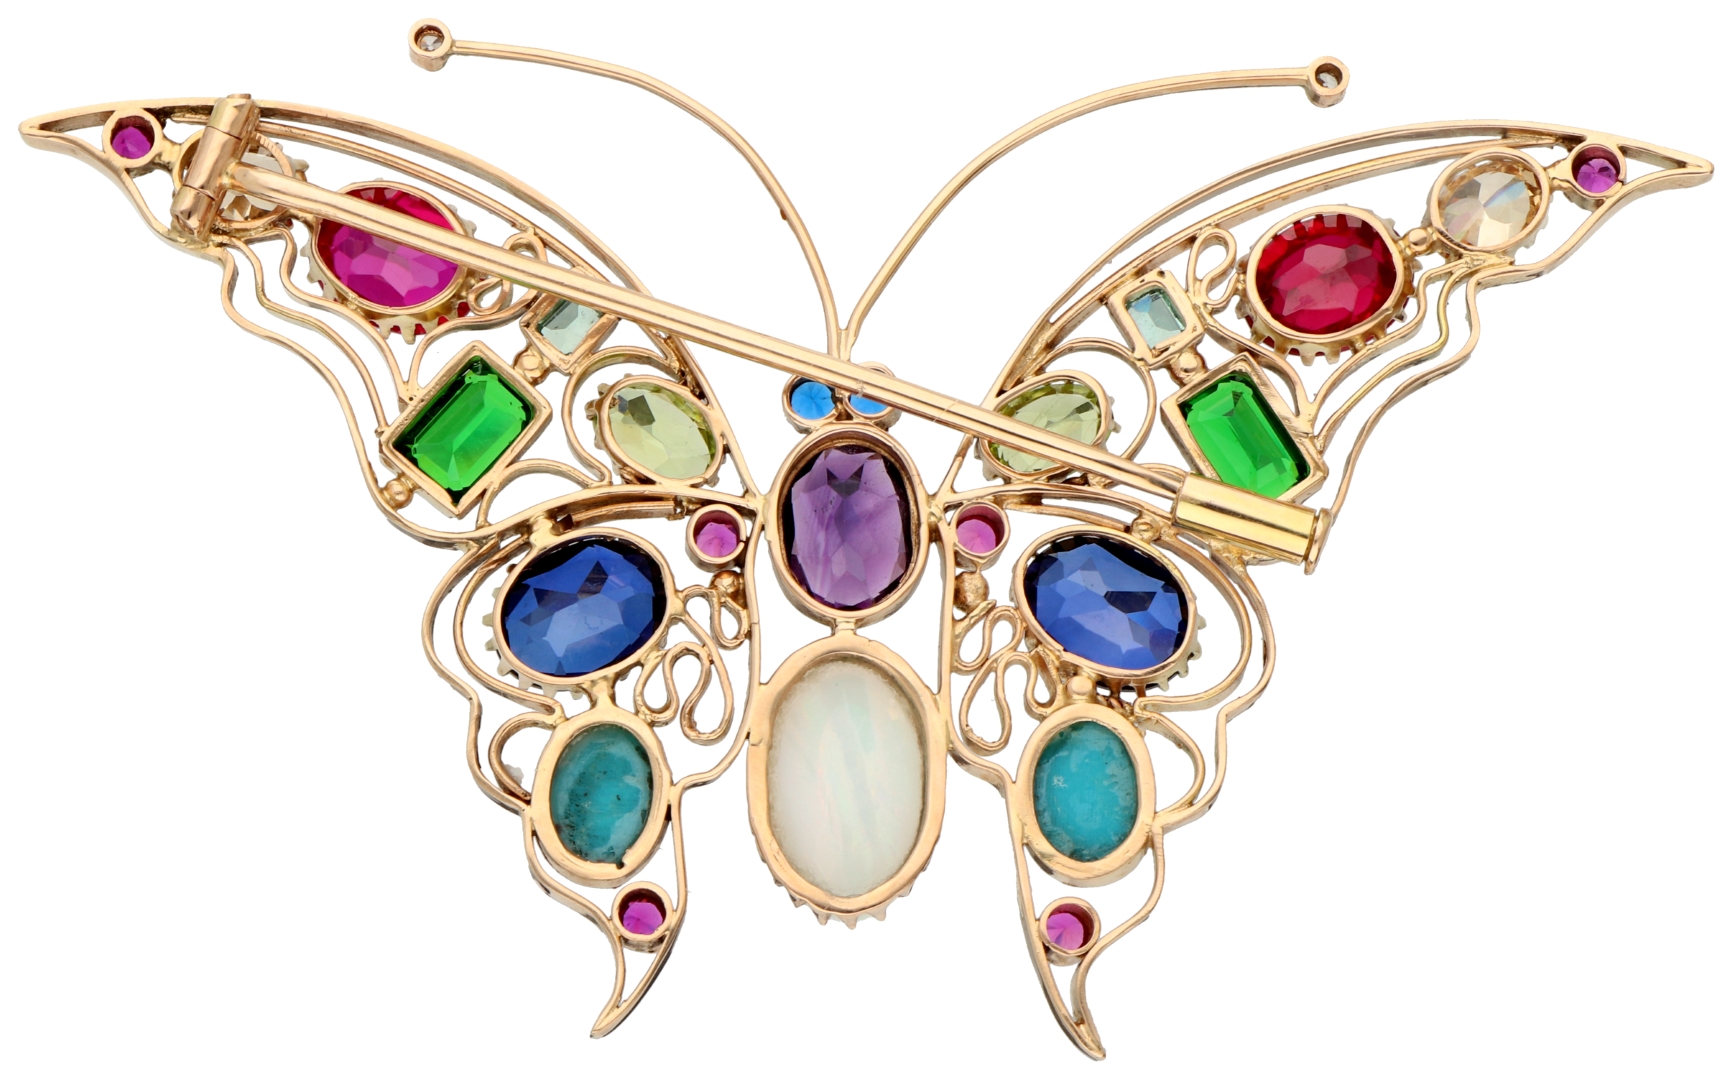 No Reserve - 14K Yellow gold butterfly brooch with various gemstones. - Image 2 of 2